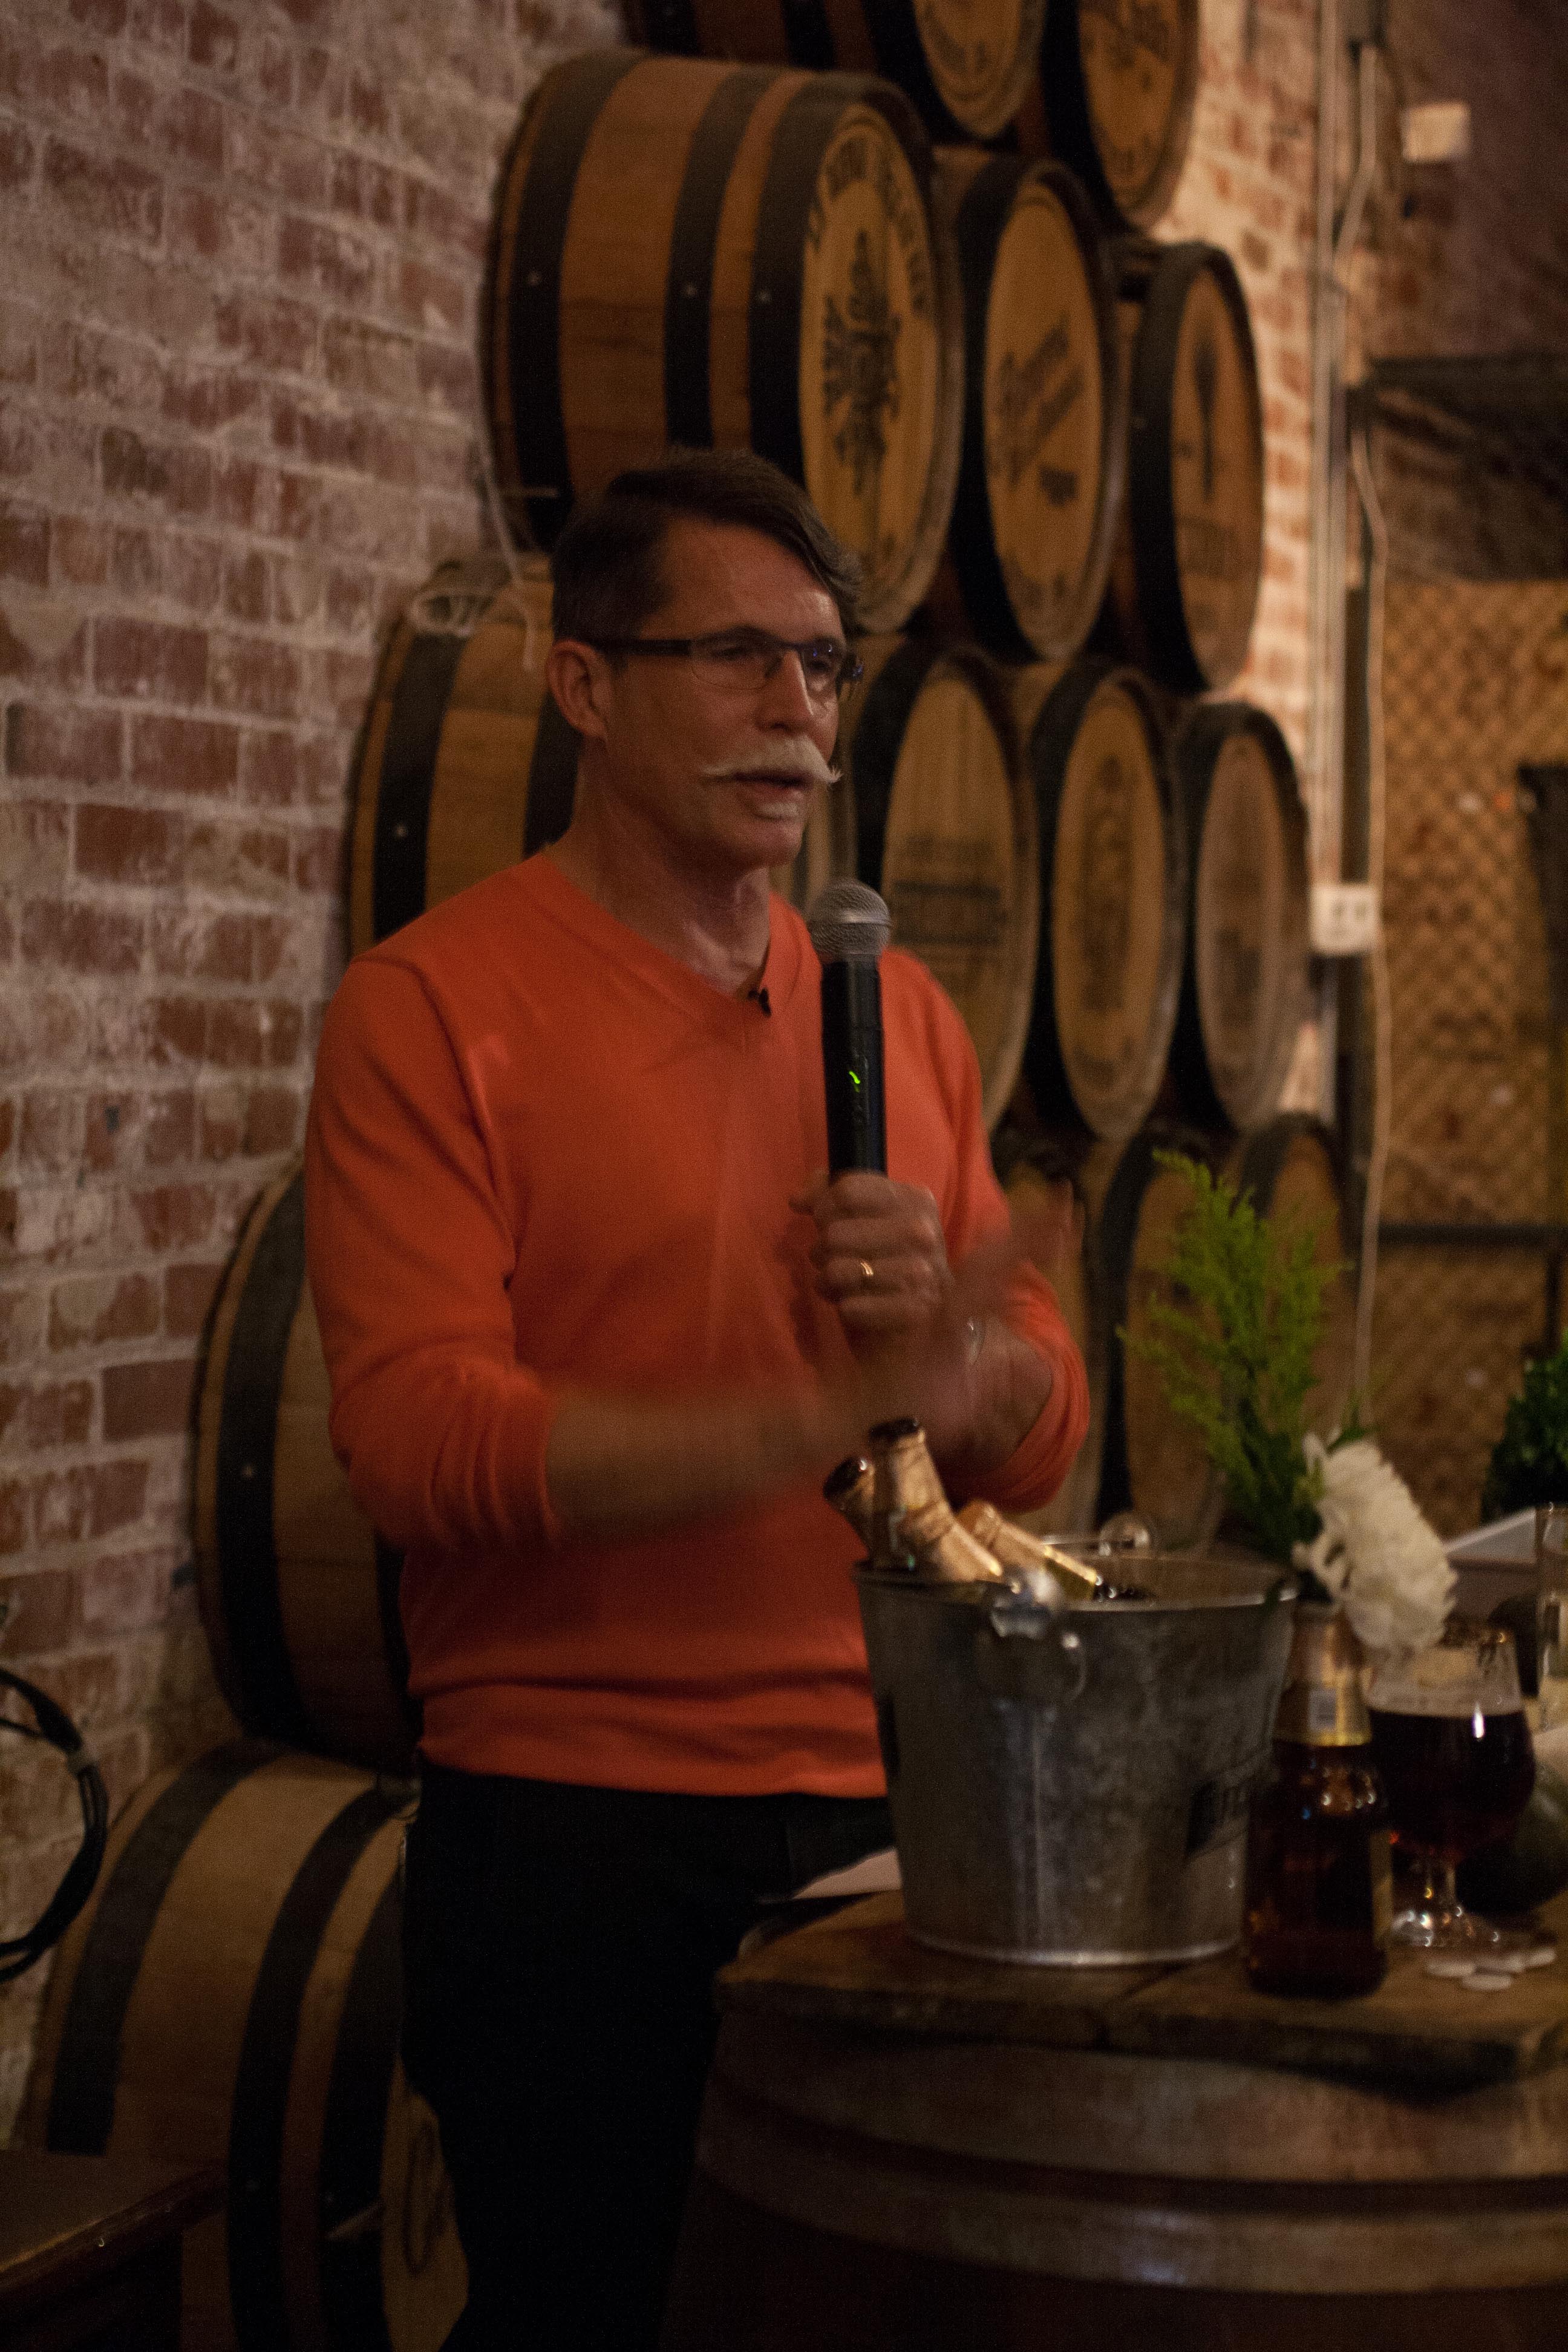 Rick Bayless & the perfect complement